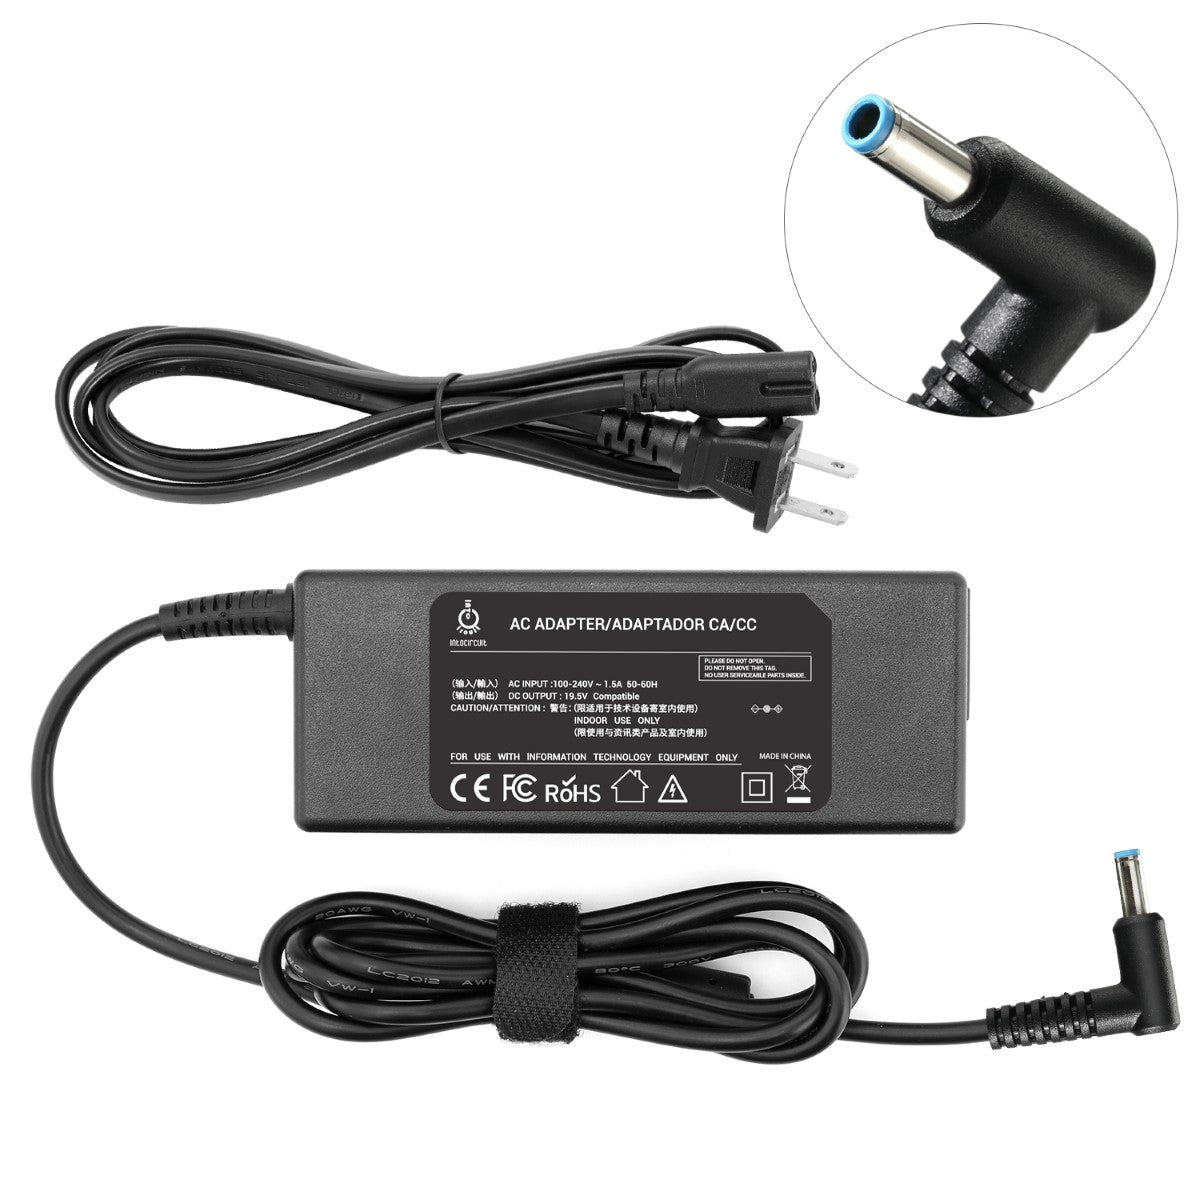 Charger for HP 15-df1043dx Spectre x360 Laptop